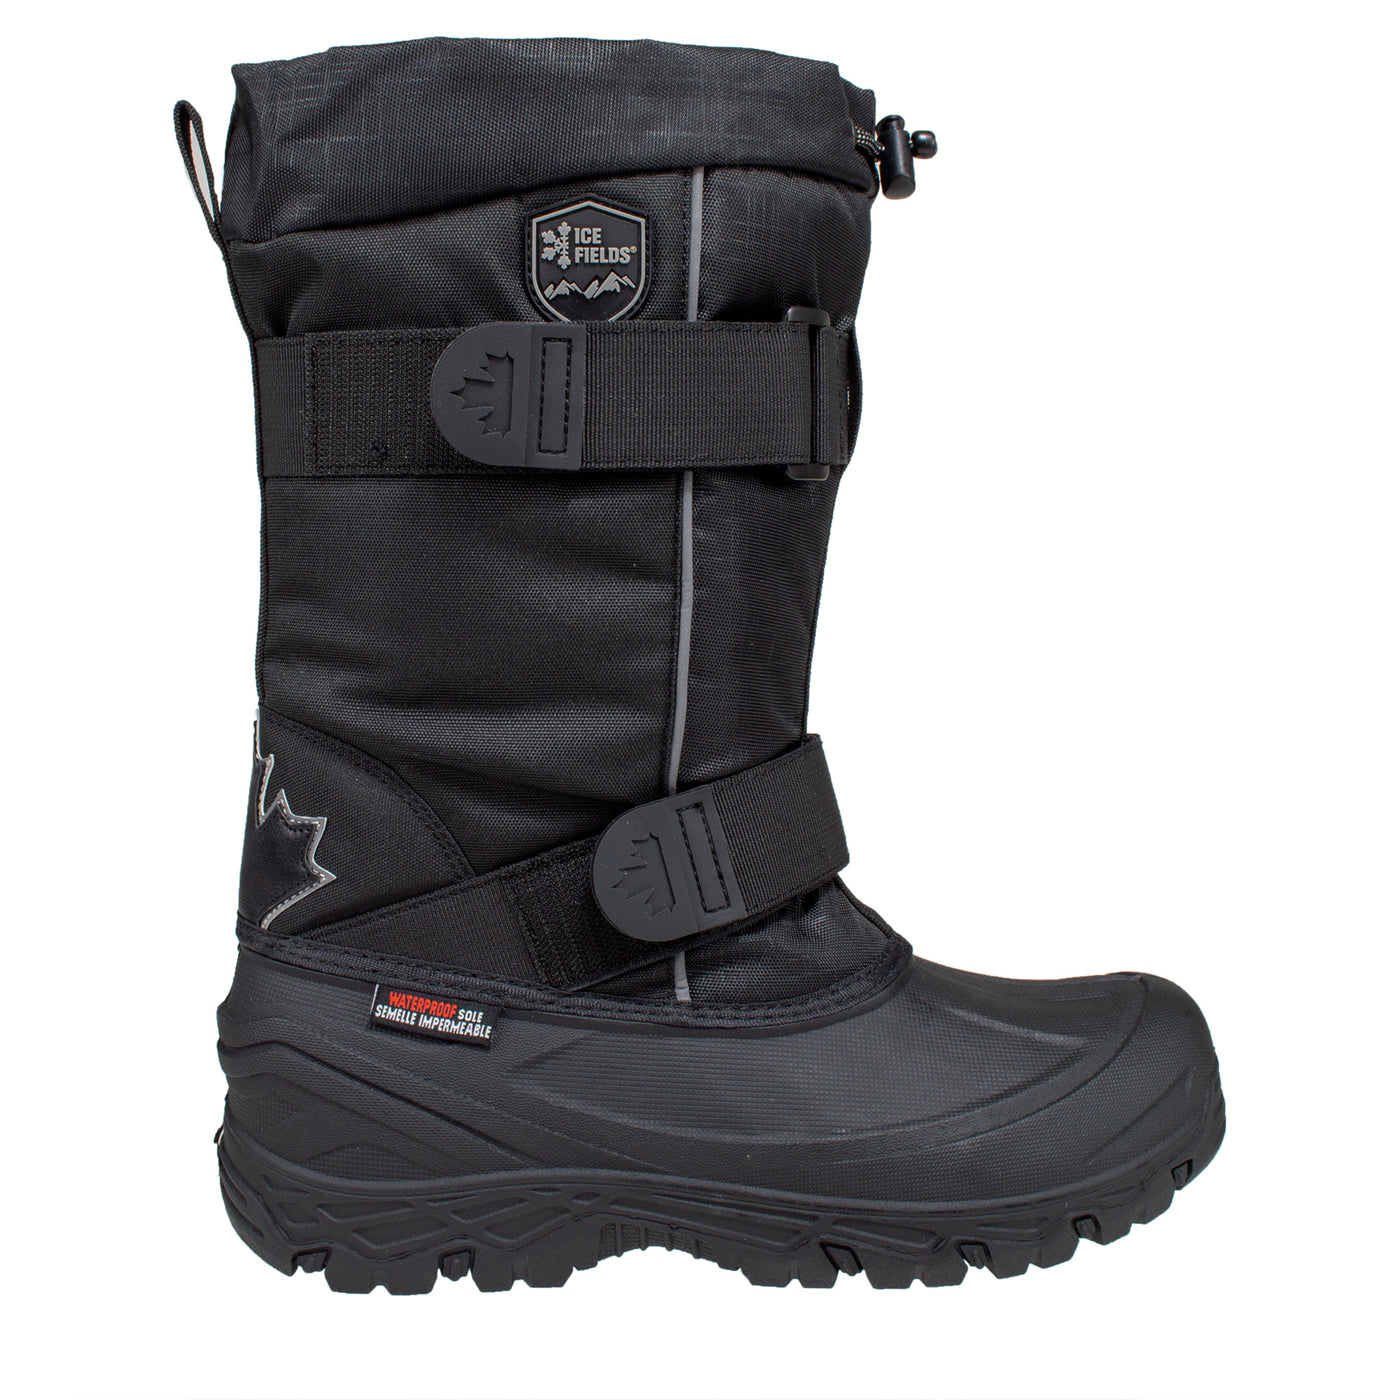 men's tall, black, waterproof pac boot with double velcro straps